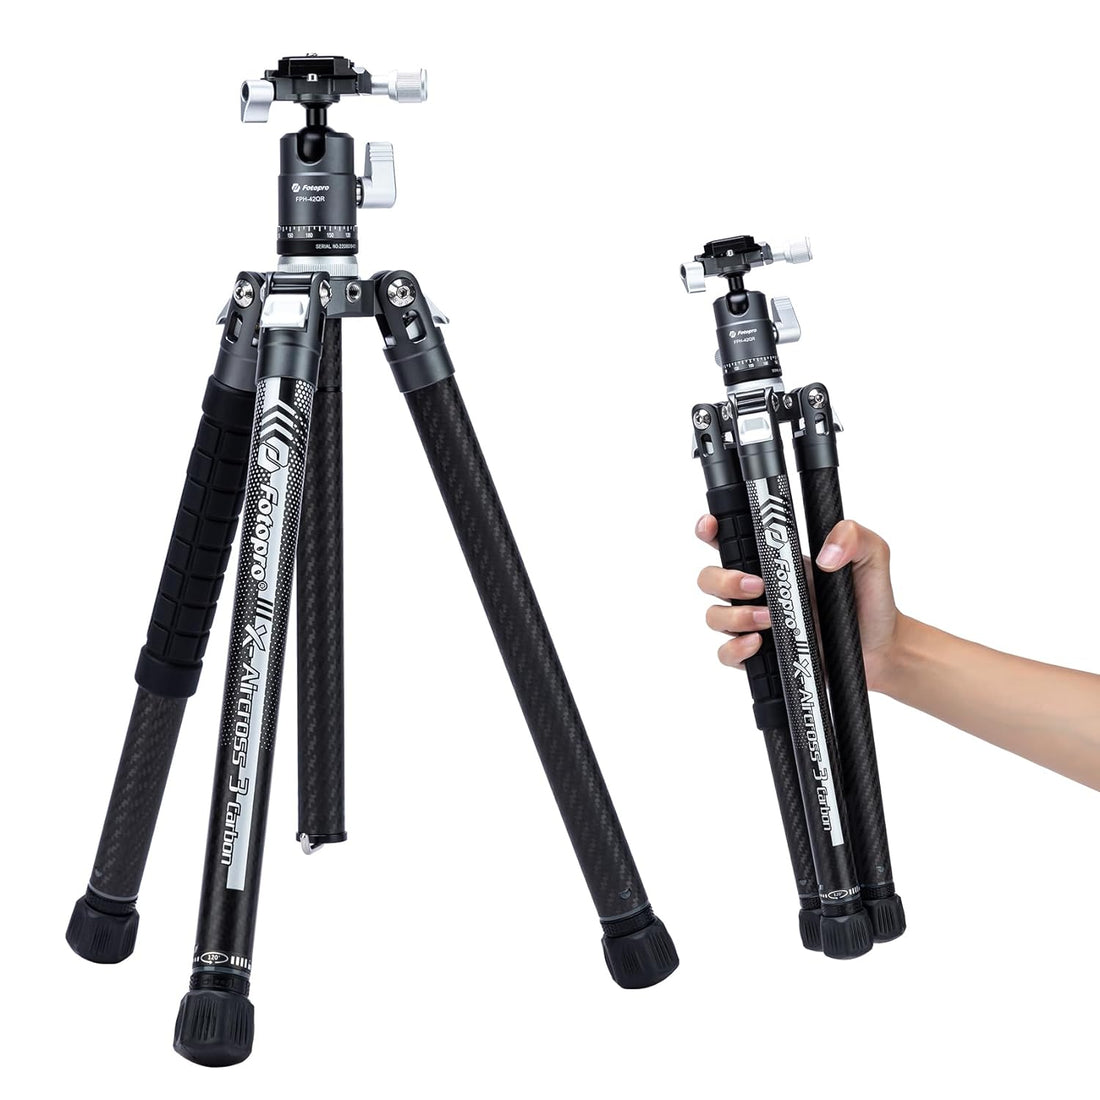 Fotopro 62Inch Lightweight Travel Camera Tripod with Monopod 360 Ball Head Extendable Stable 2.07lbs Ultra Light Professional Carbon Fiber Tripod for Camera DSLR Max Loads Up 22lbs X-Aircross3 Grey